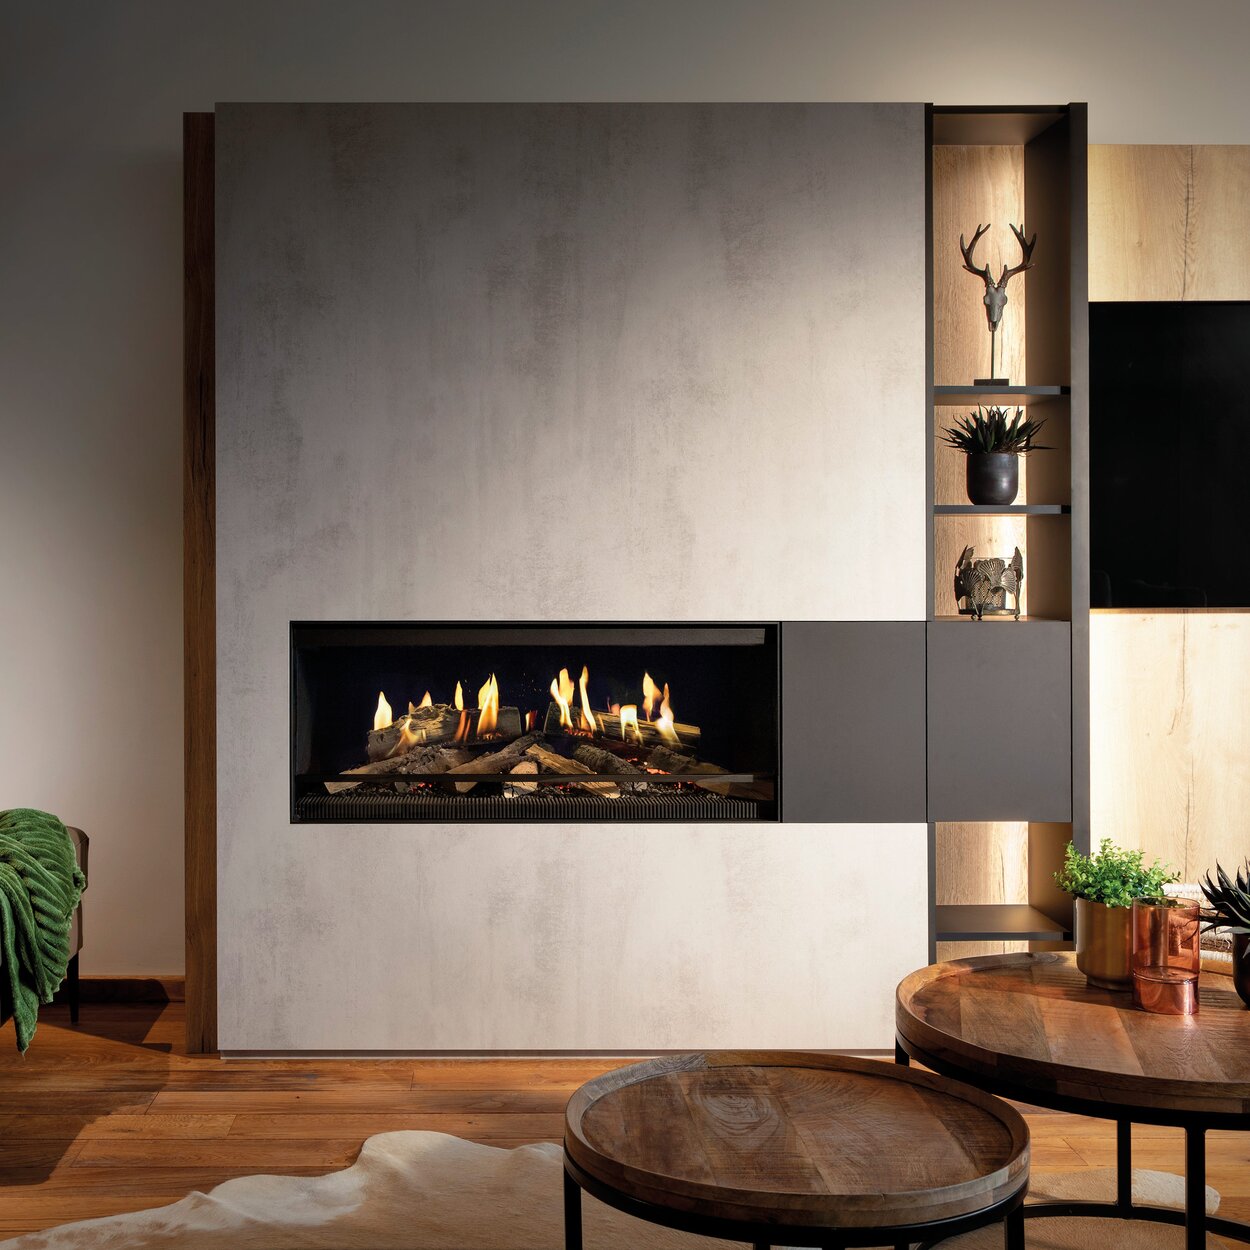 The E-One 100 electric fireplace front in the living room built into a concrete element.